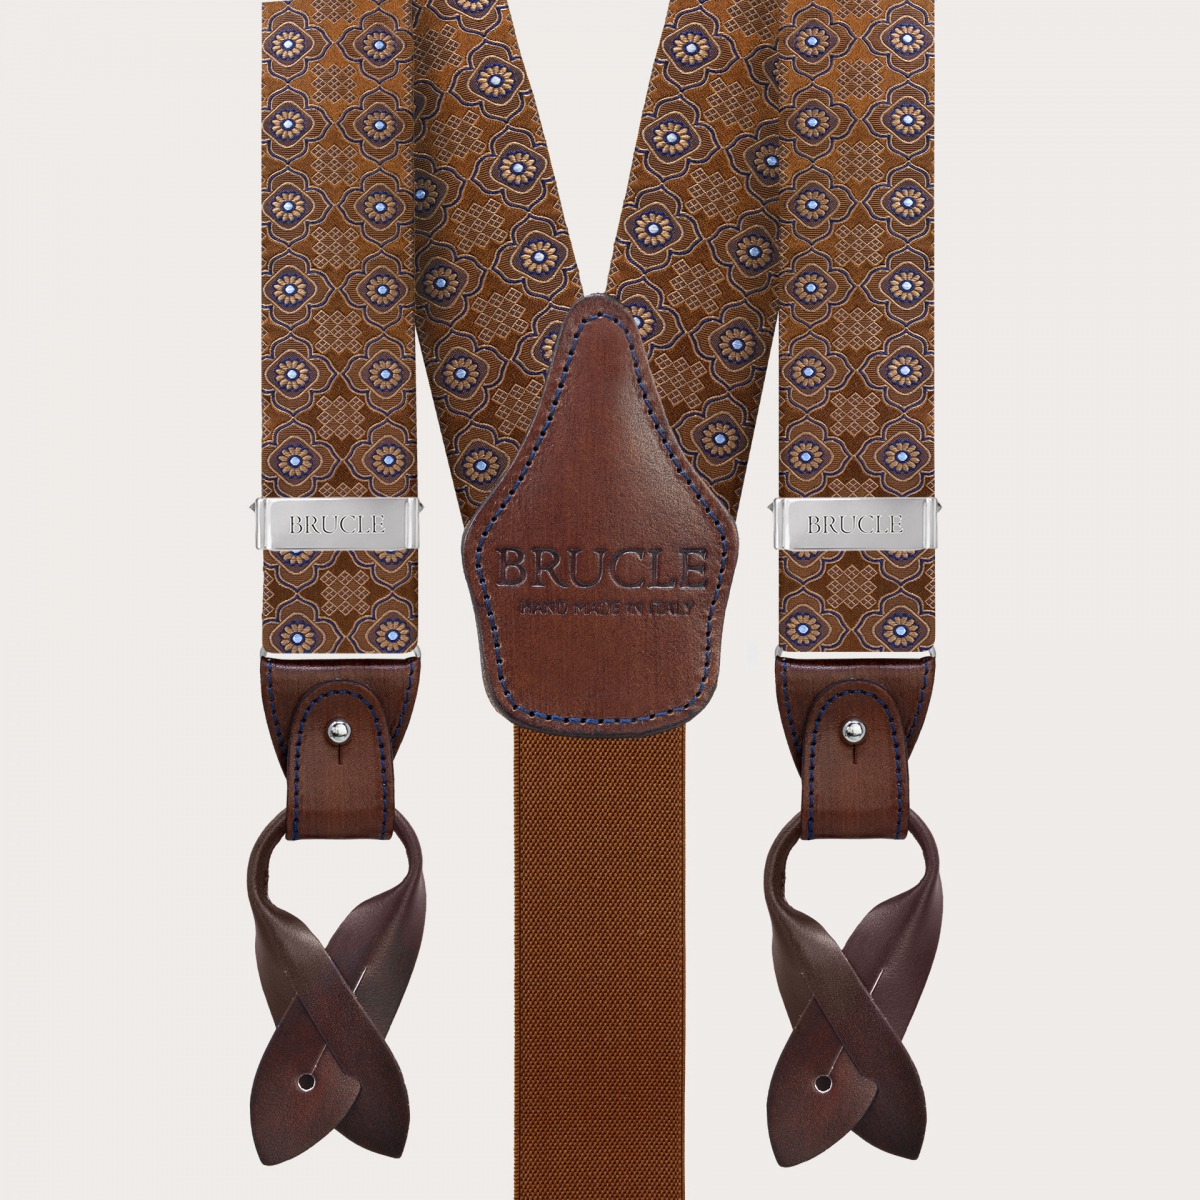 Sophisticated men's brown silk suspenders with a floral pattern